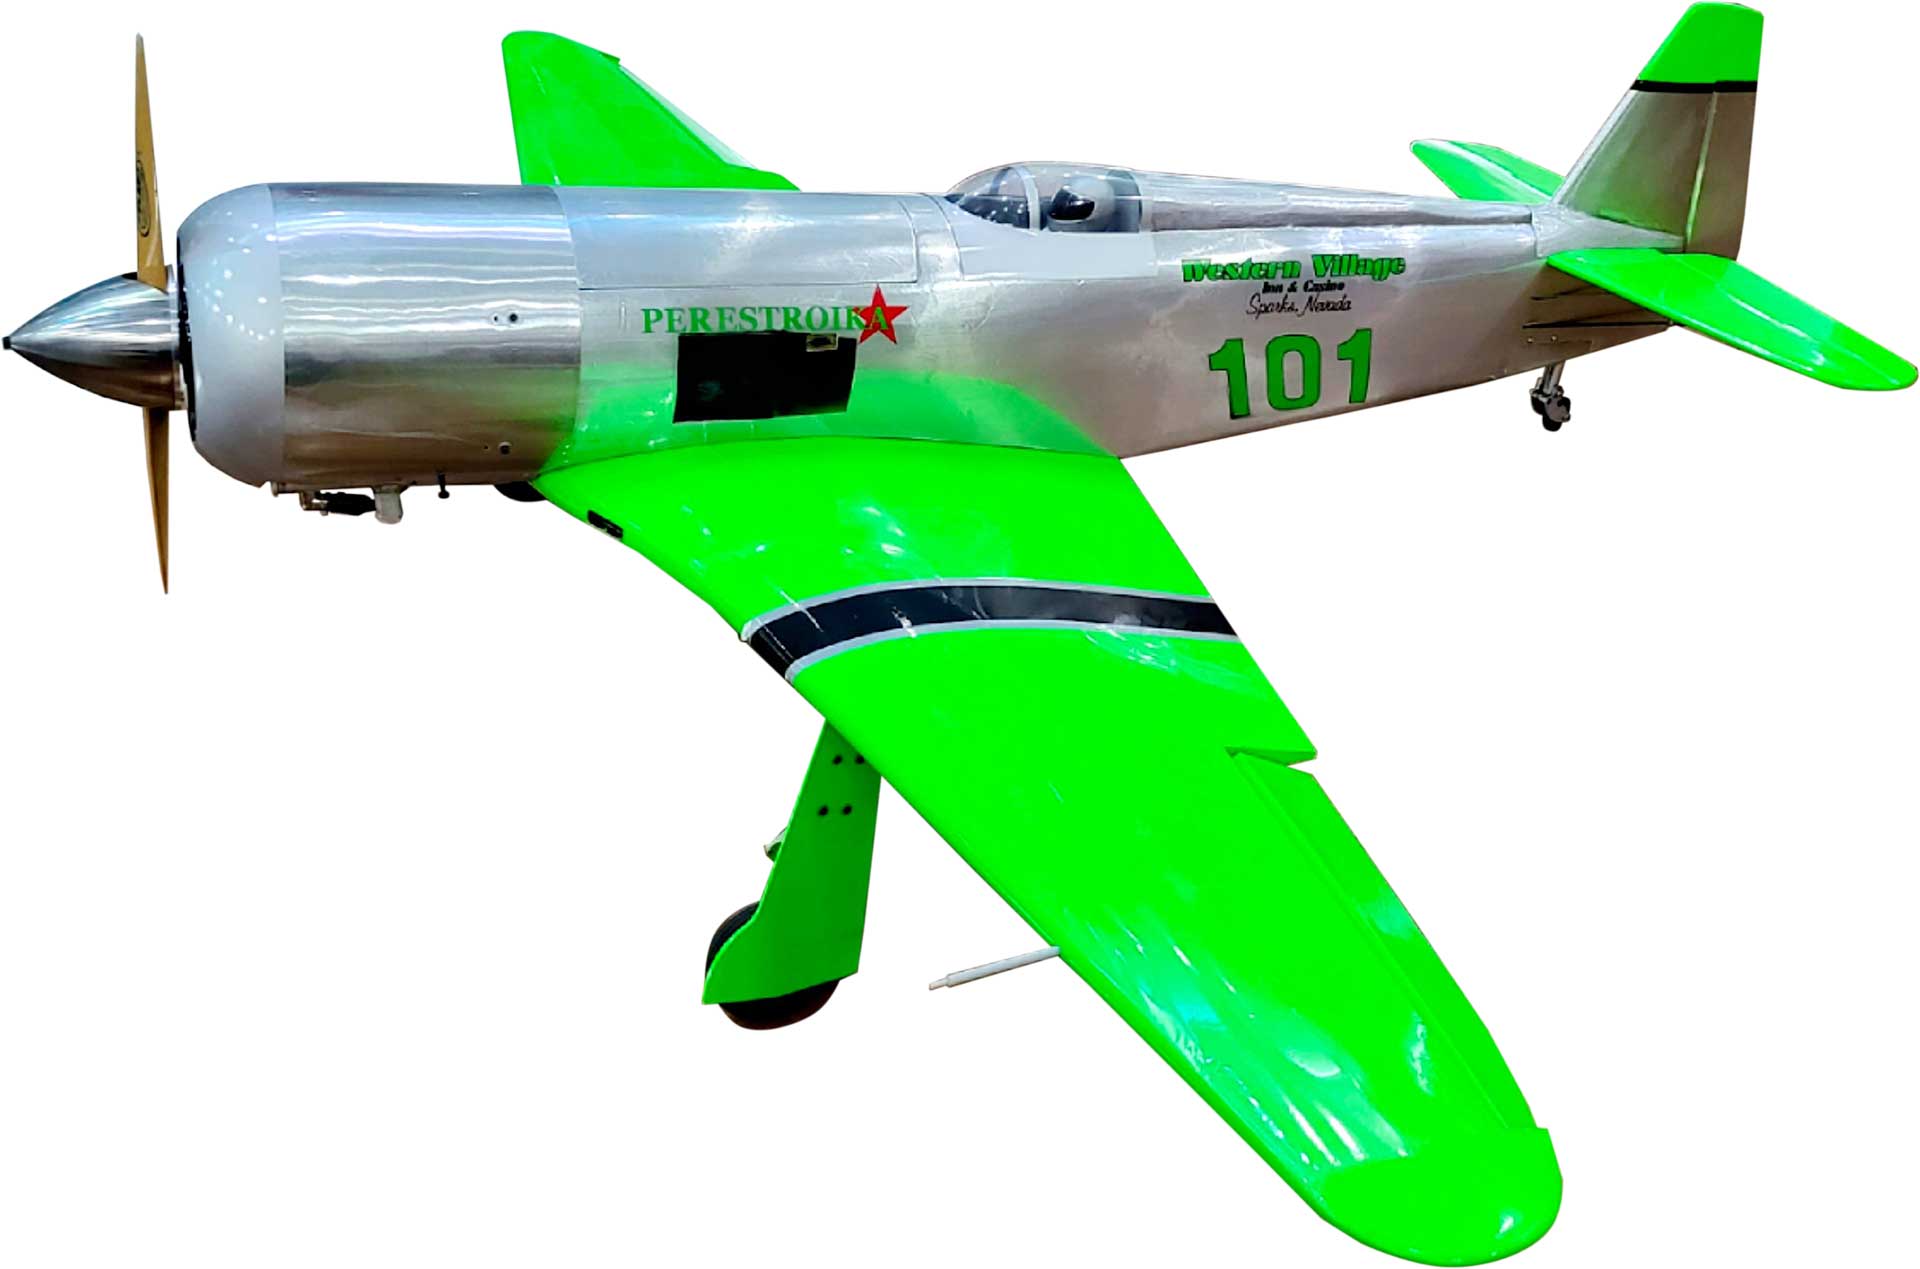 Seagull Models ( SG-Models ) YAK 11 71" 1,8m CHROM 35cc AIRRACE ARF "Perestroika" with Retractable landing g